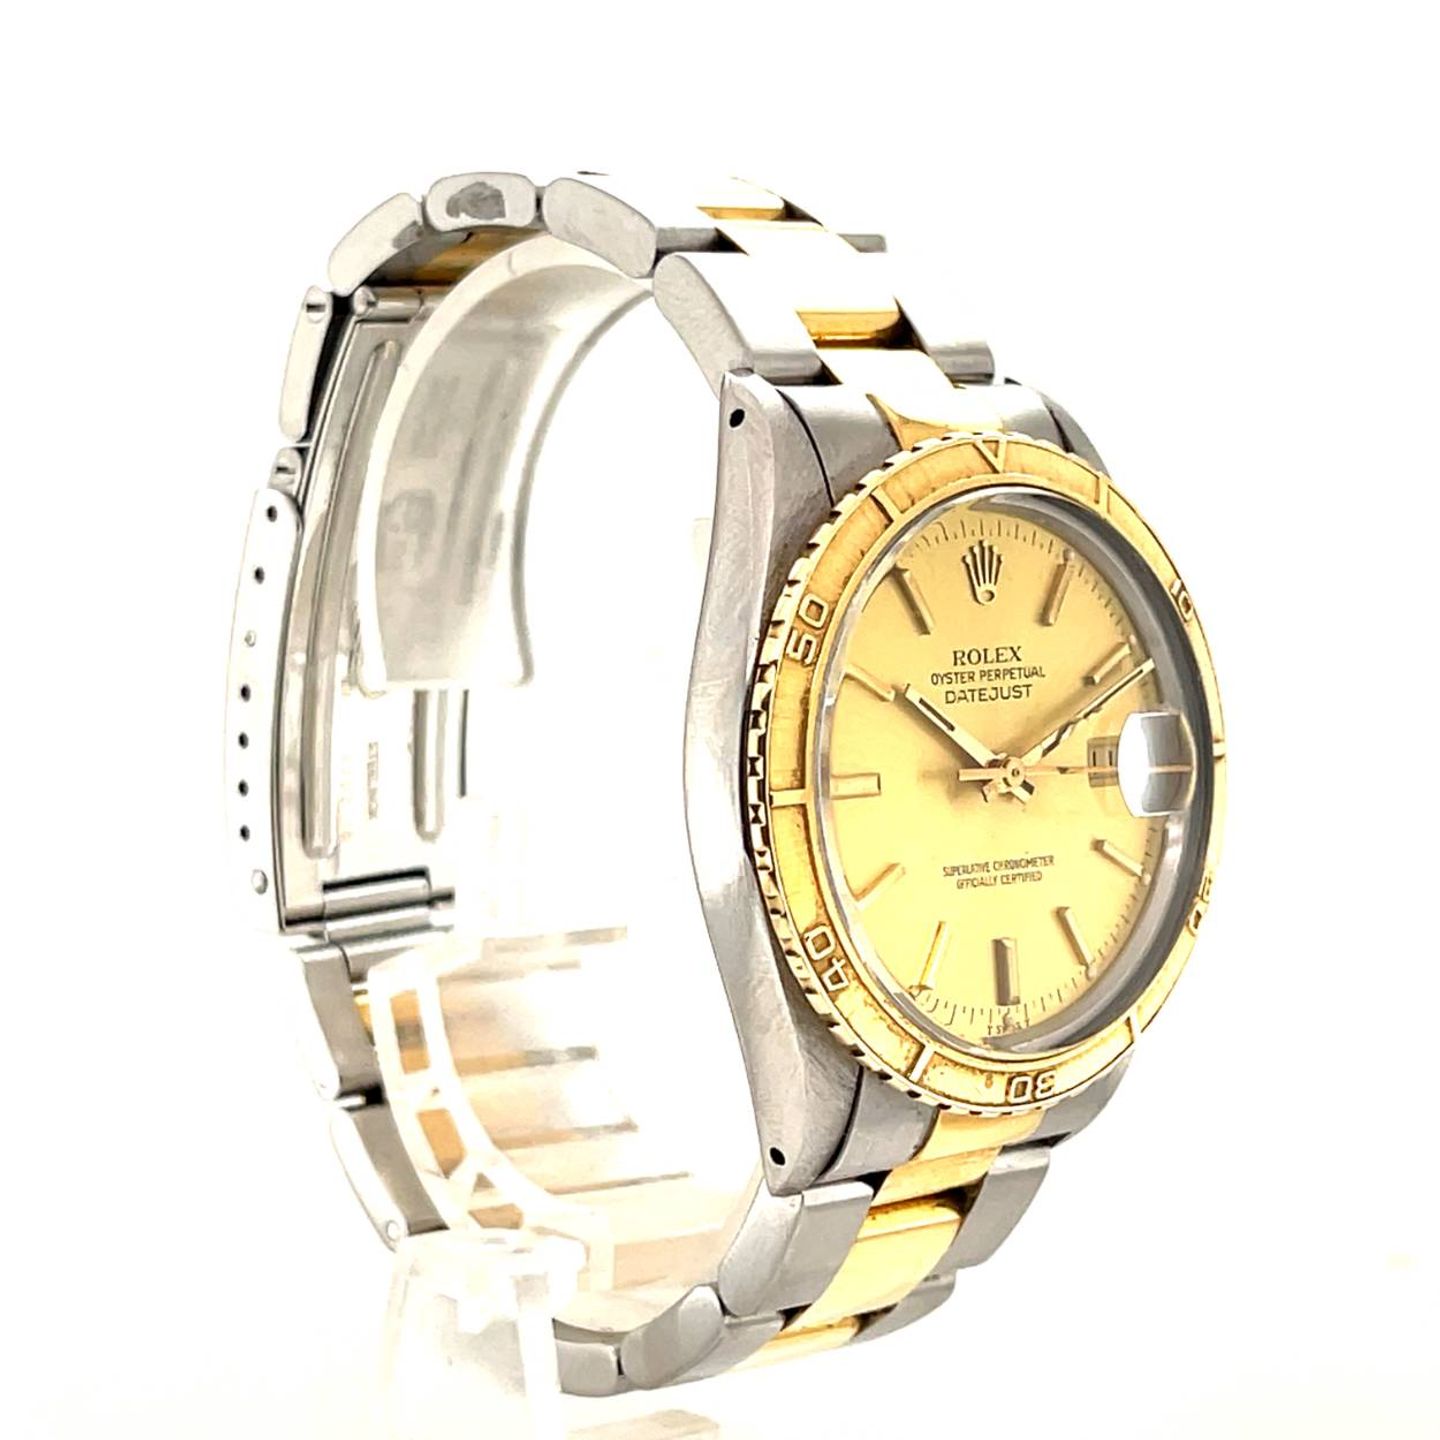 Rolex Datejust Turn-O-Graph 16253 (1979) - Champagne dial 36 mm Gold/Steel case (5/5)